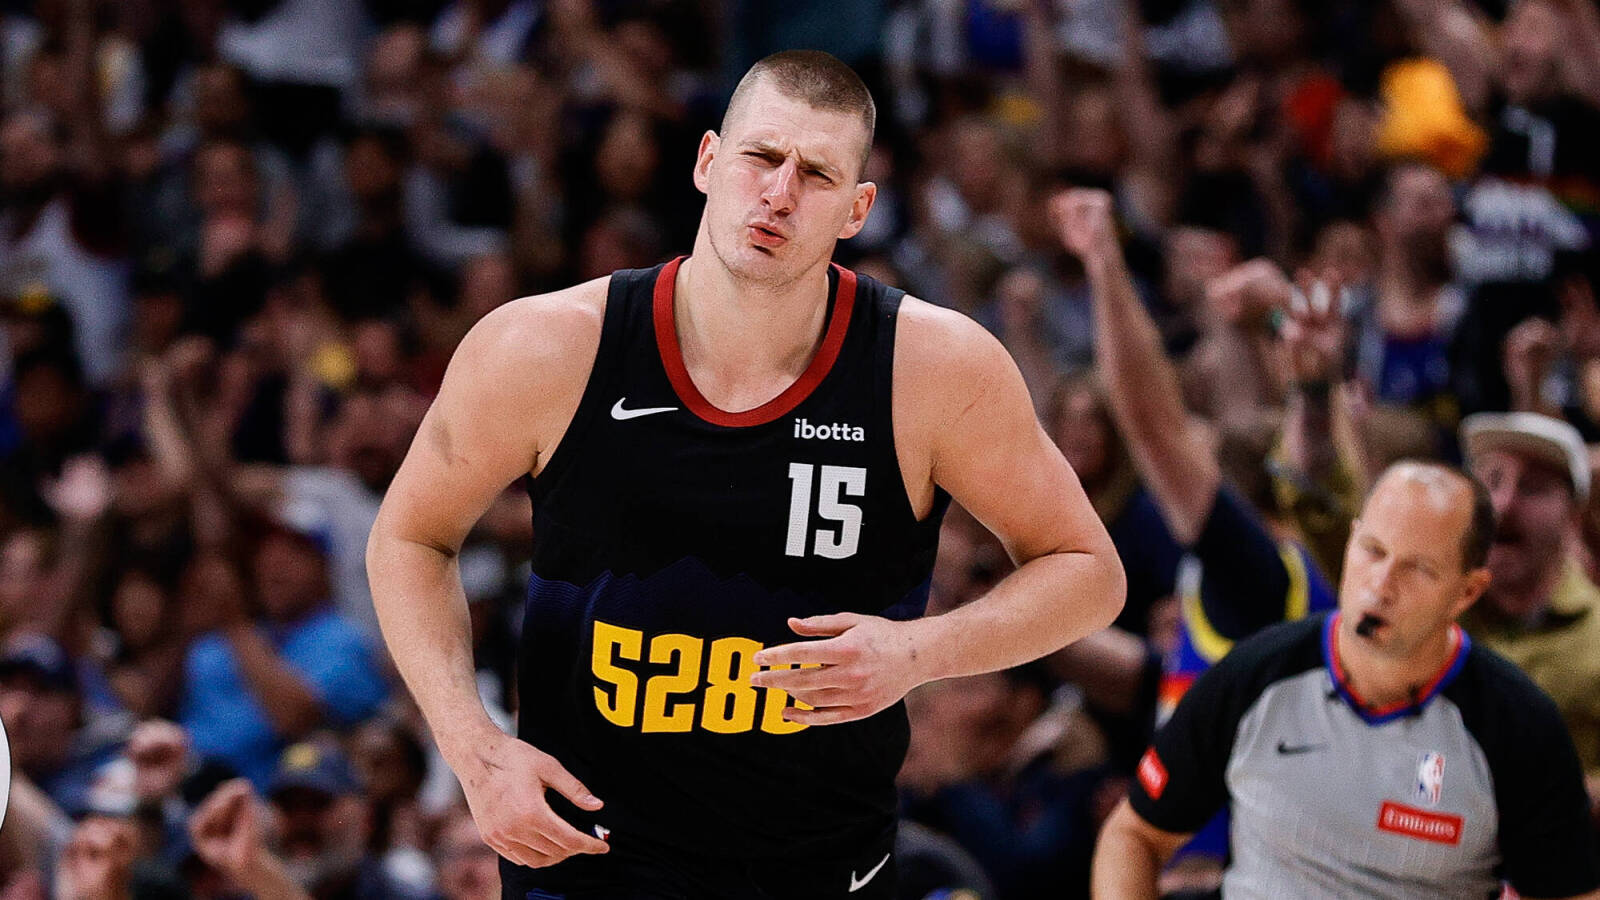 Watch: Nikola Jokic completes the ridiculous and-one